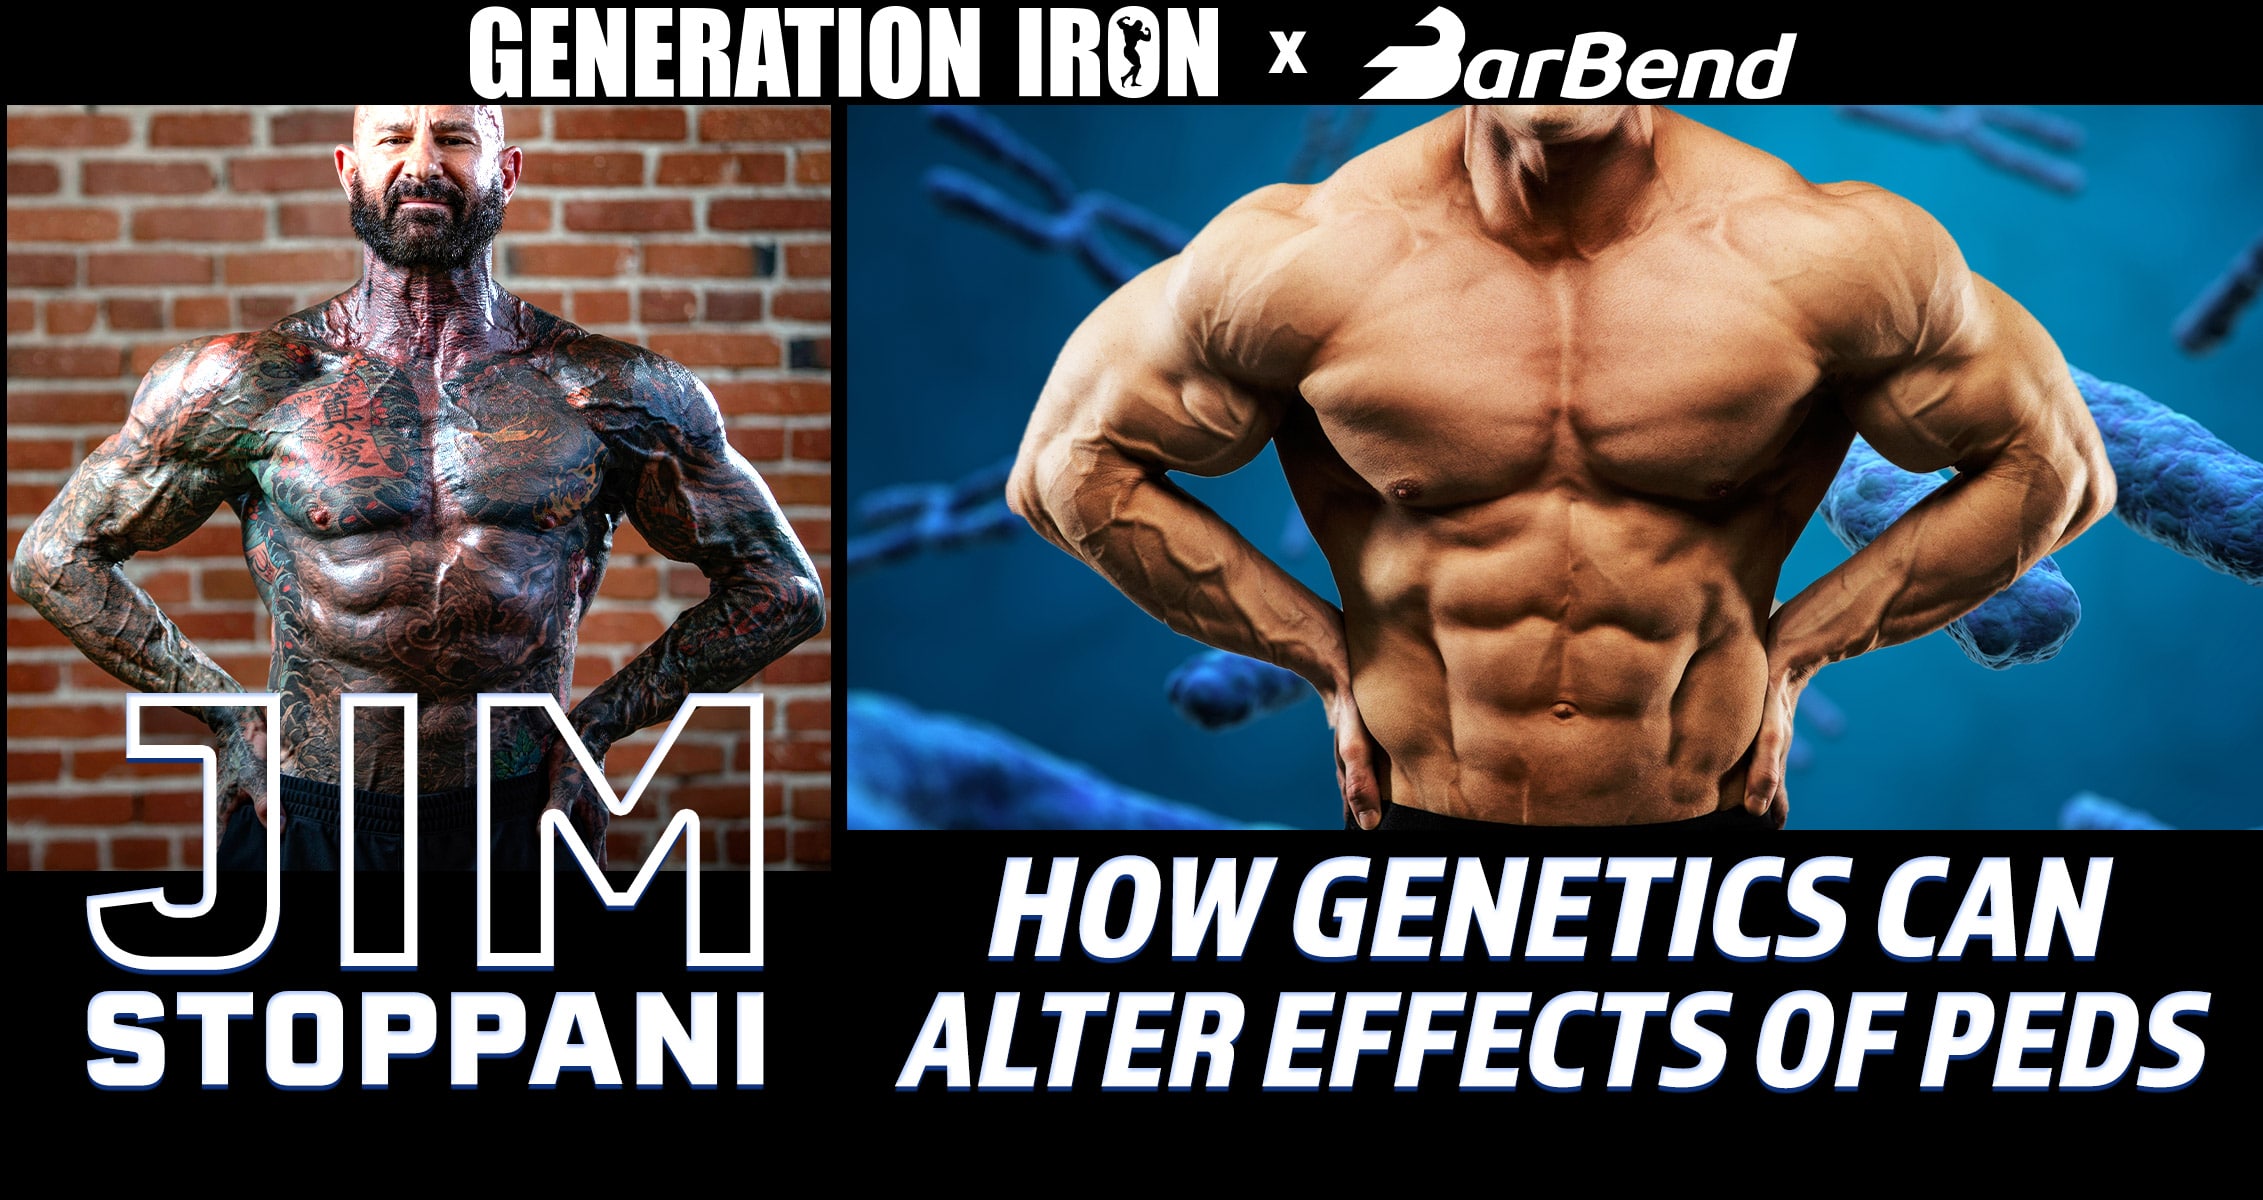 Jim Stoppani: The Role Of Genetics In PED Usage In Bodybuilding